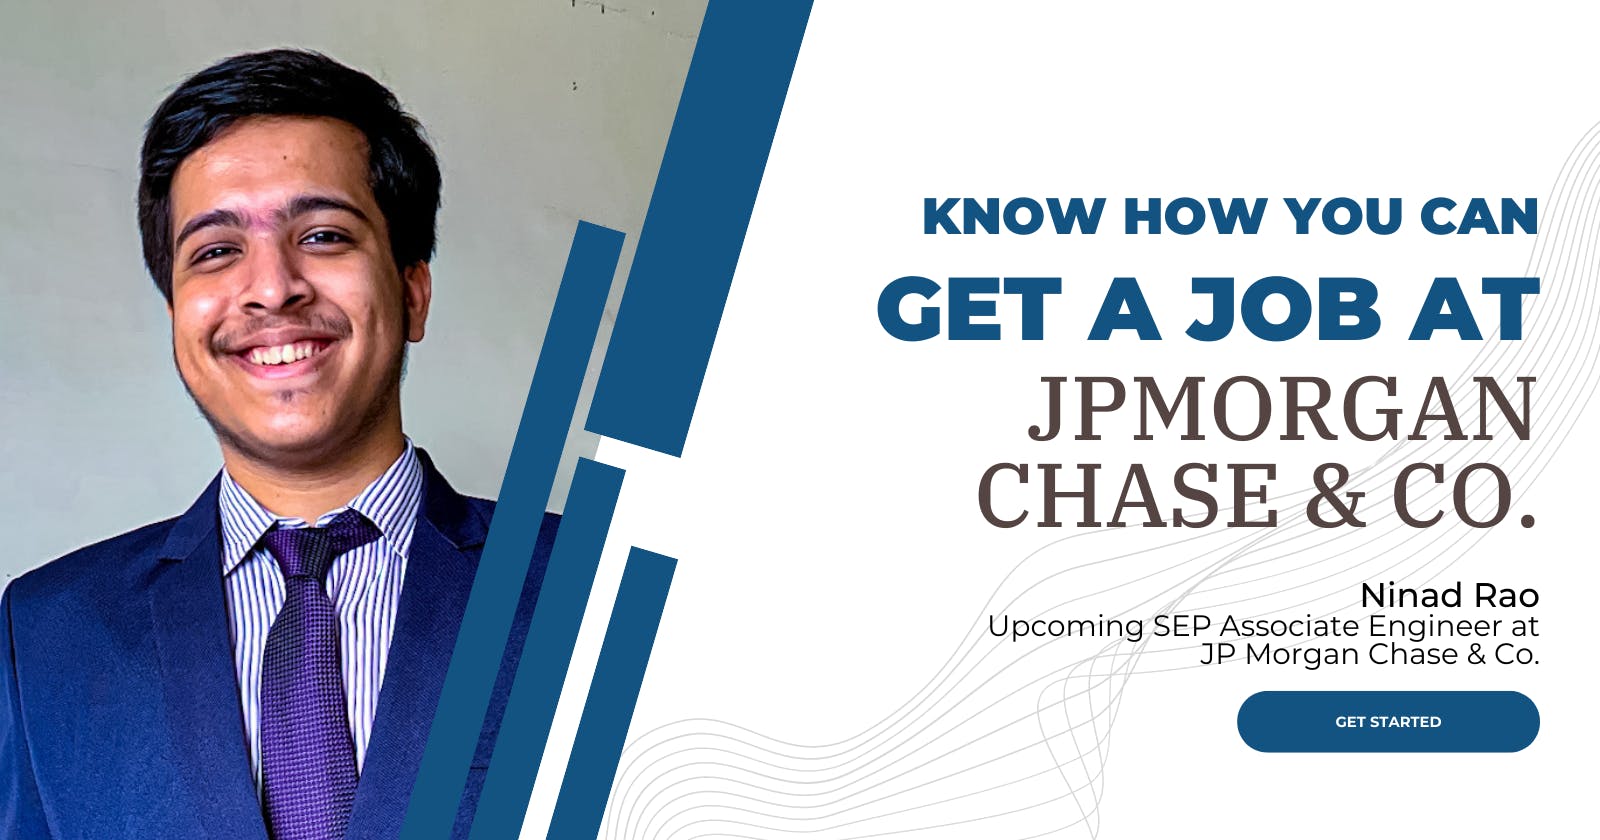 How to get into JPMorgan Chase & Co. !?